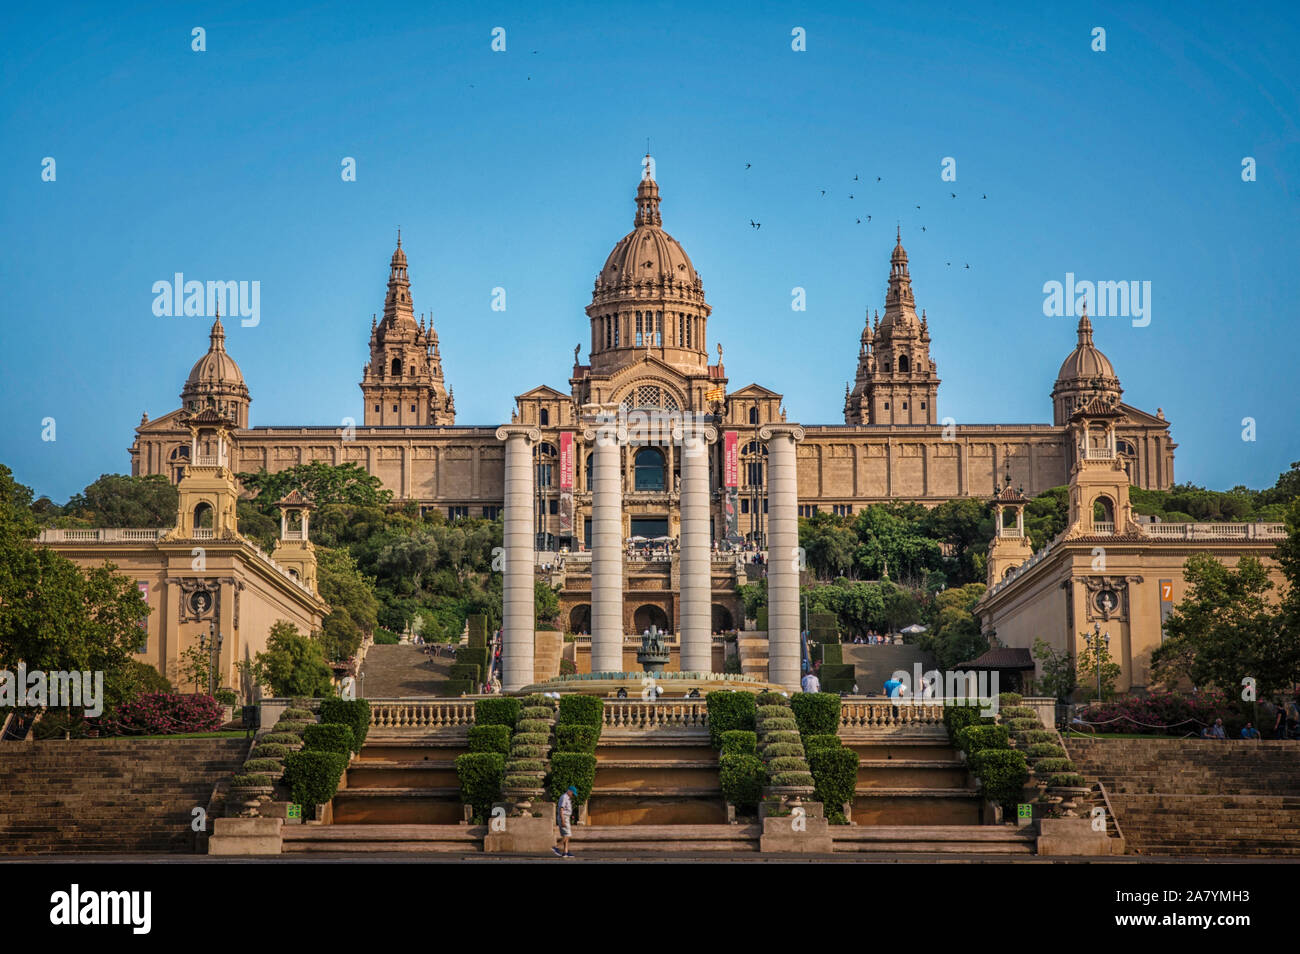 Postcard of Barcelona. Cityscape of Montjuïc, MNAC and Font Màgica in Catalan's capital. Stock Photo